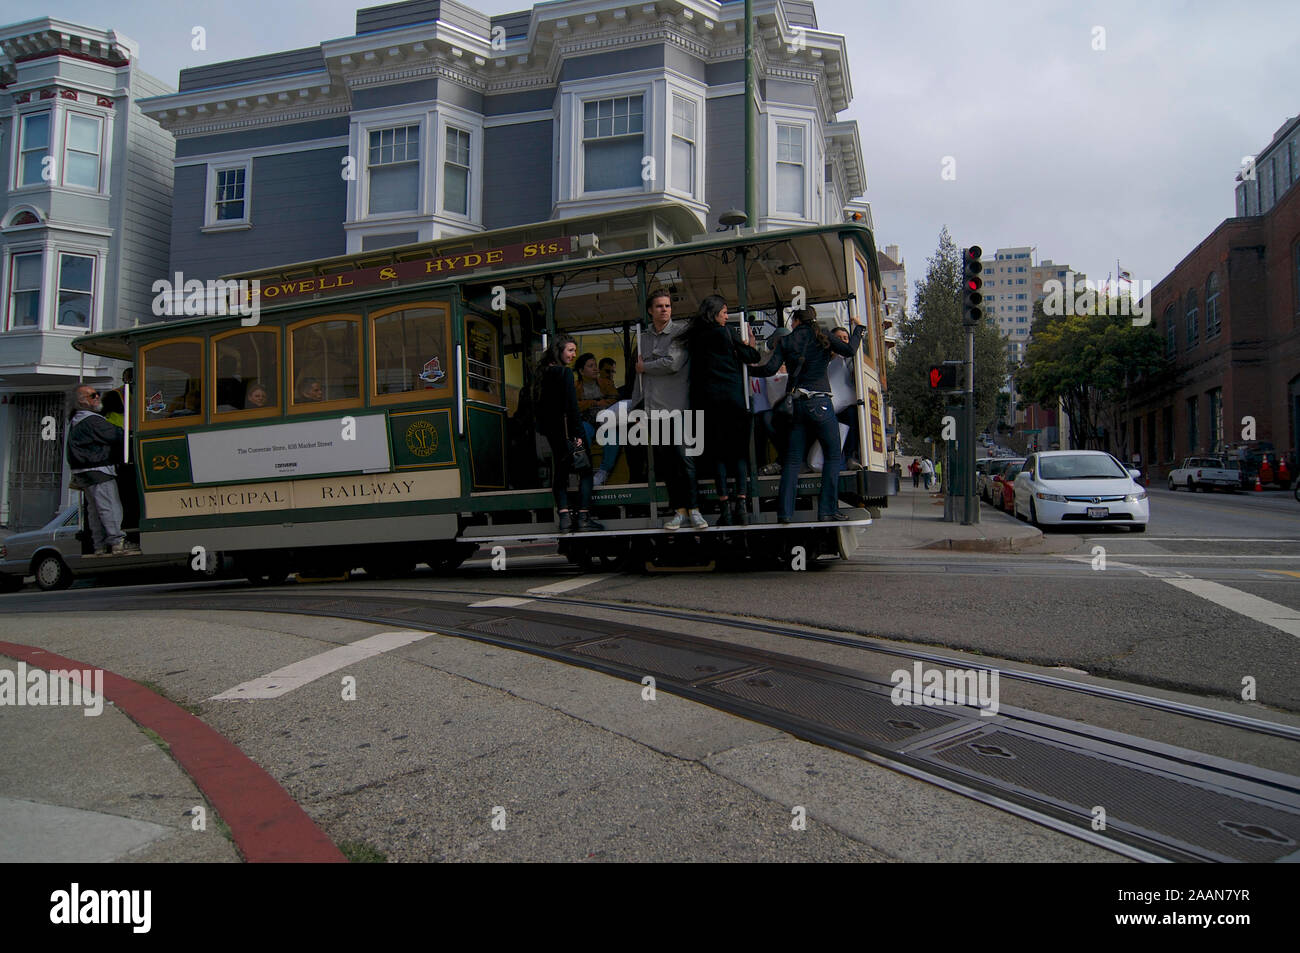 San Francisco, California, USA - 23rd May 2015 : View of a typical Cable Car of the Powell & Hyde line in San Francisco, USA Stock Photo